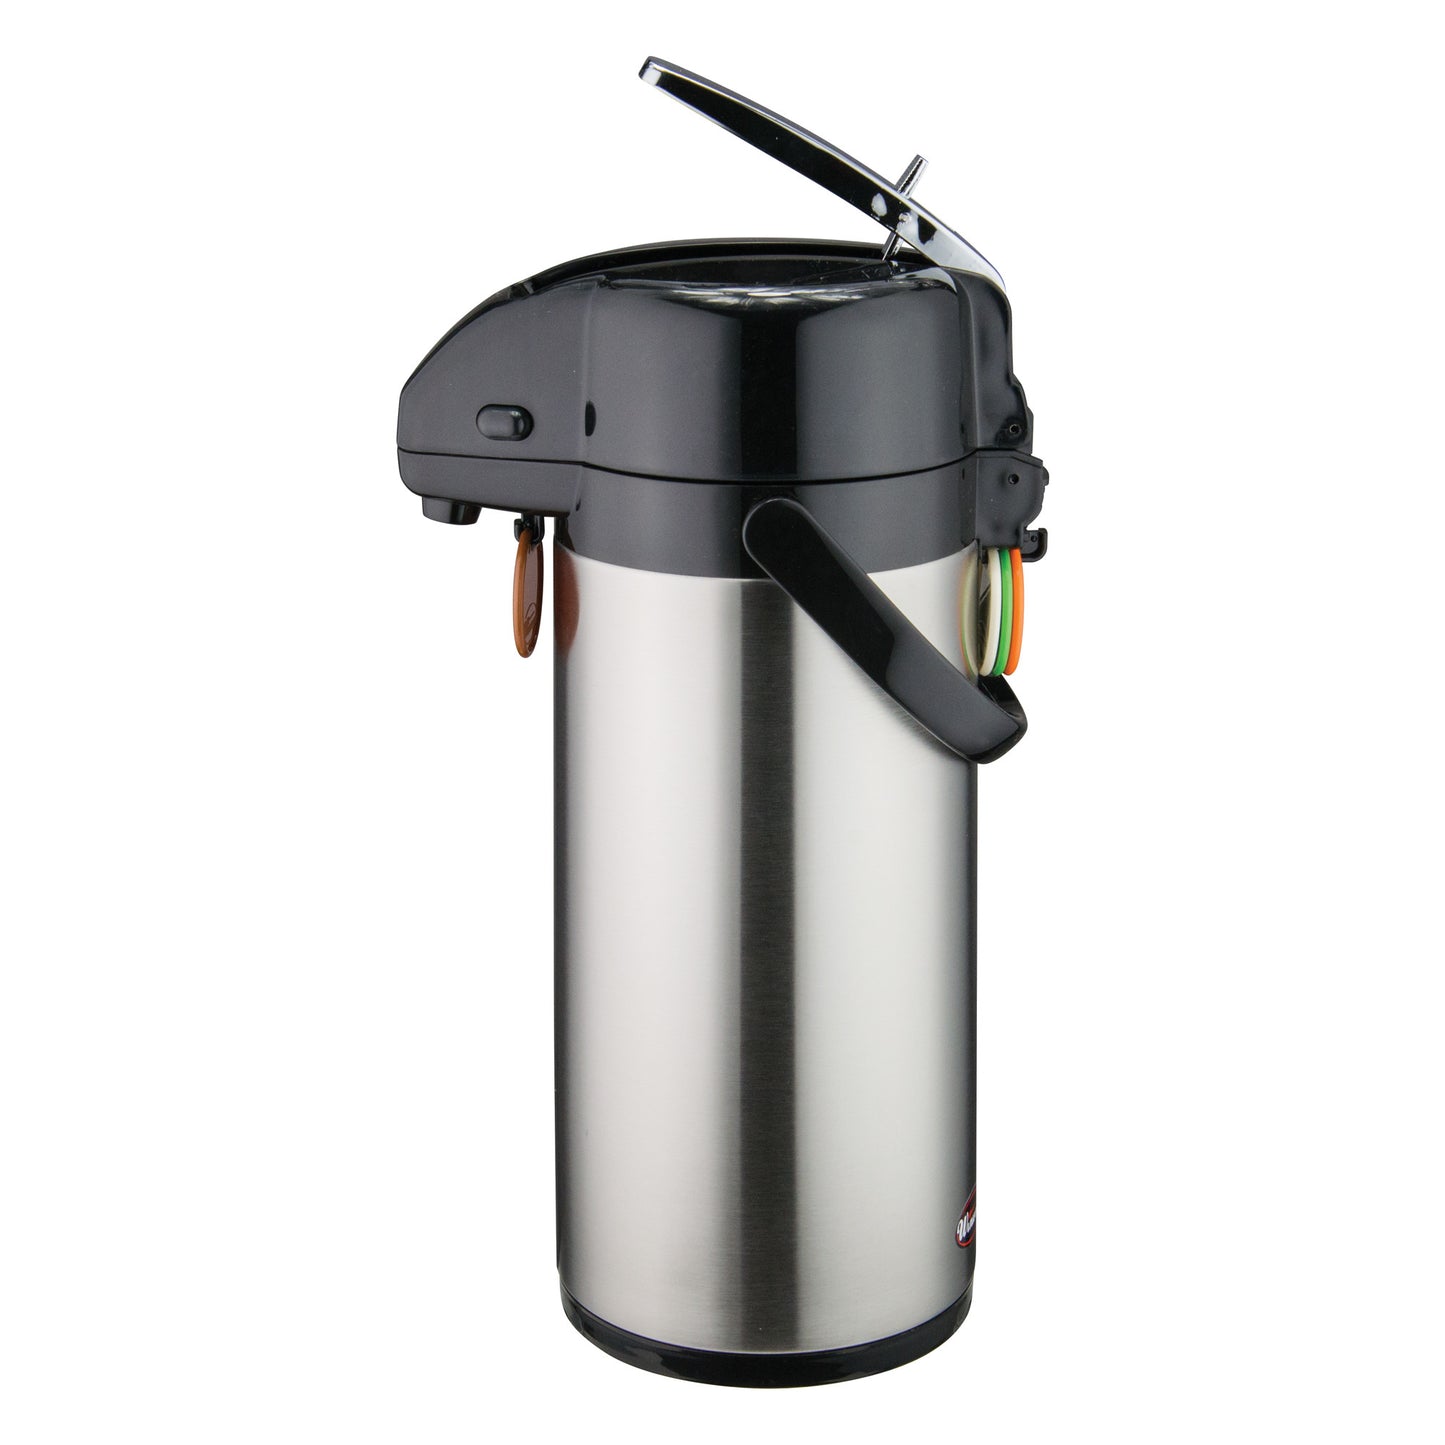 APSK-725 - Stainless Steel Lined Airpot, Lever Top - 2.5 Liter